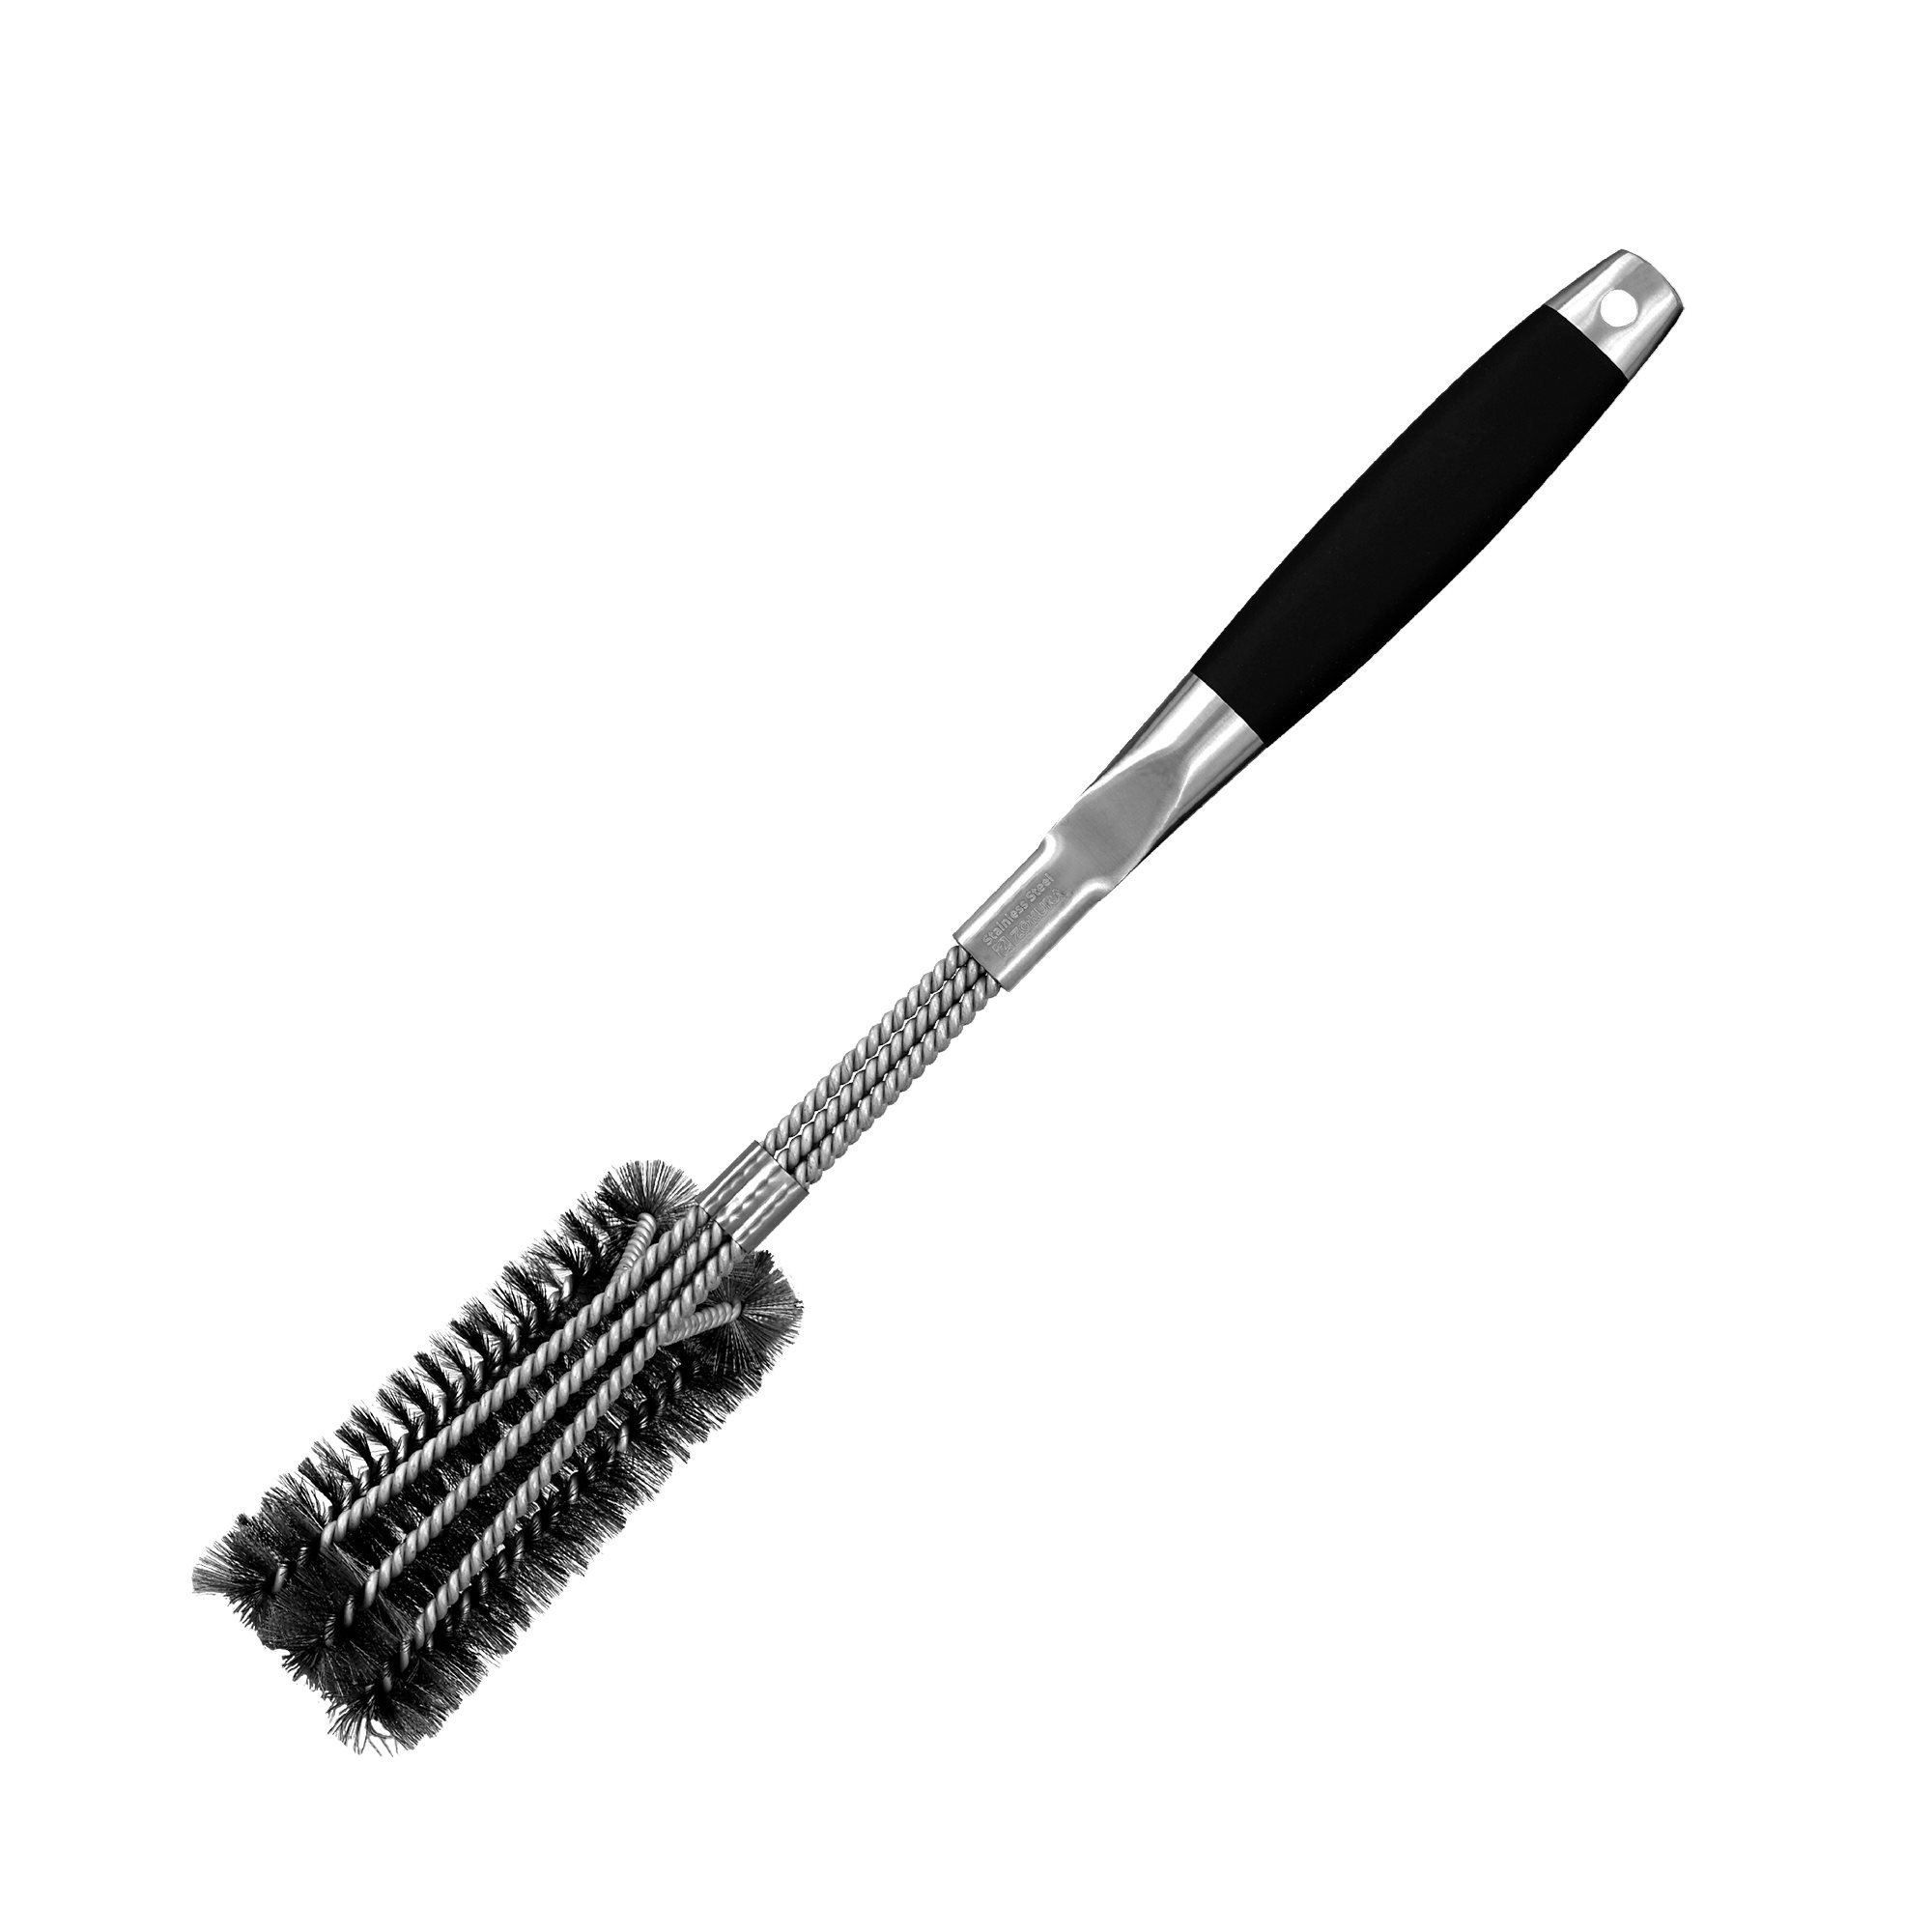 Brosse Pour Barbecue Acier Inoxydable Brosse Nettoyage Grill